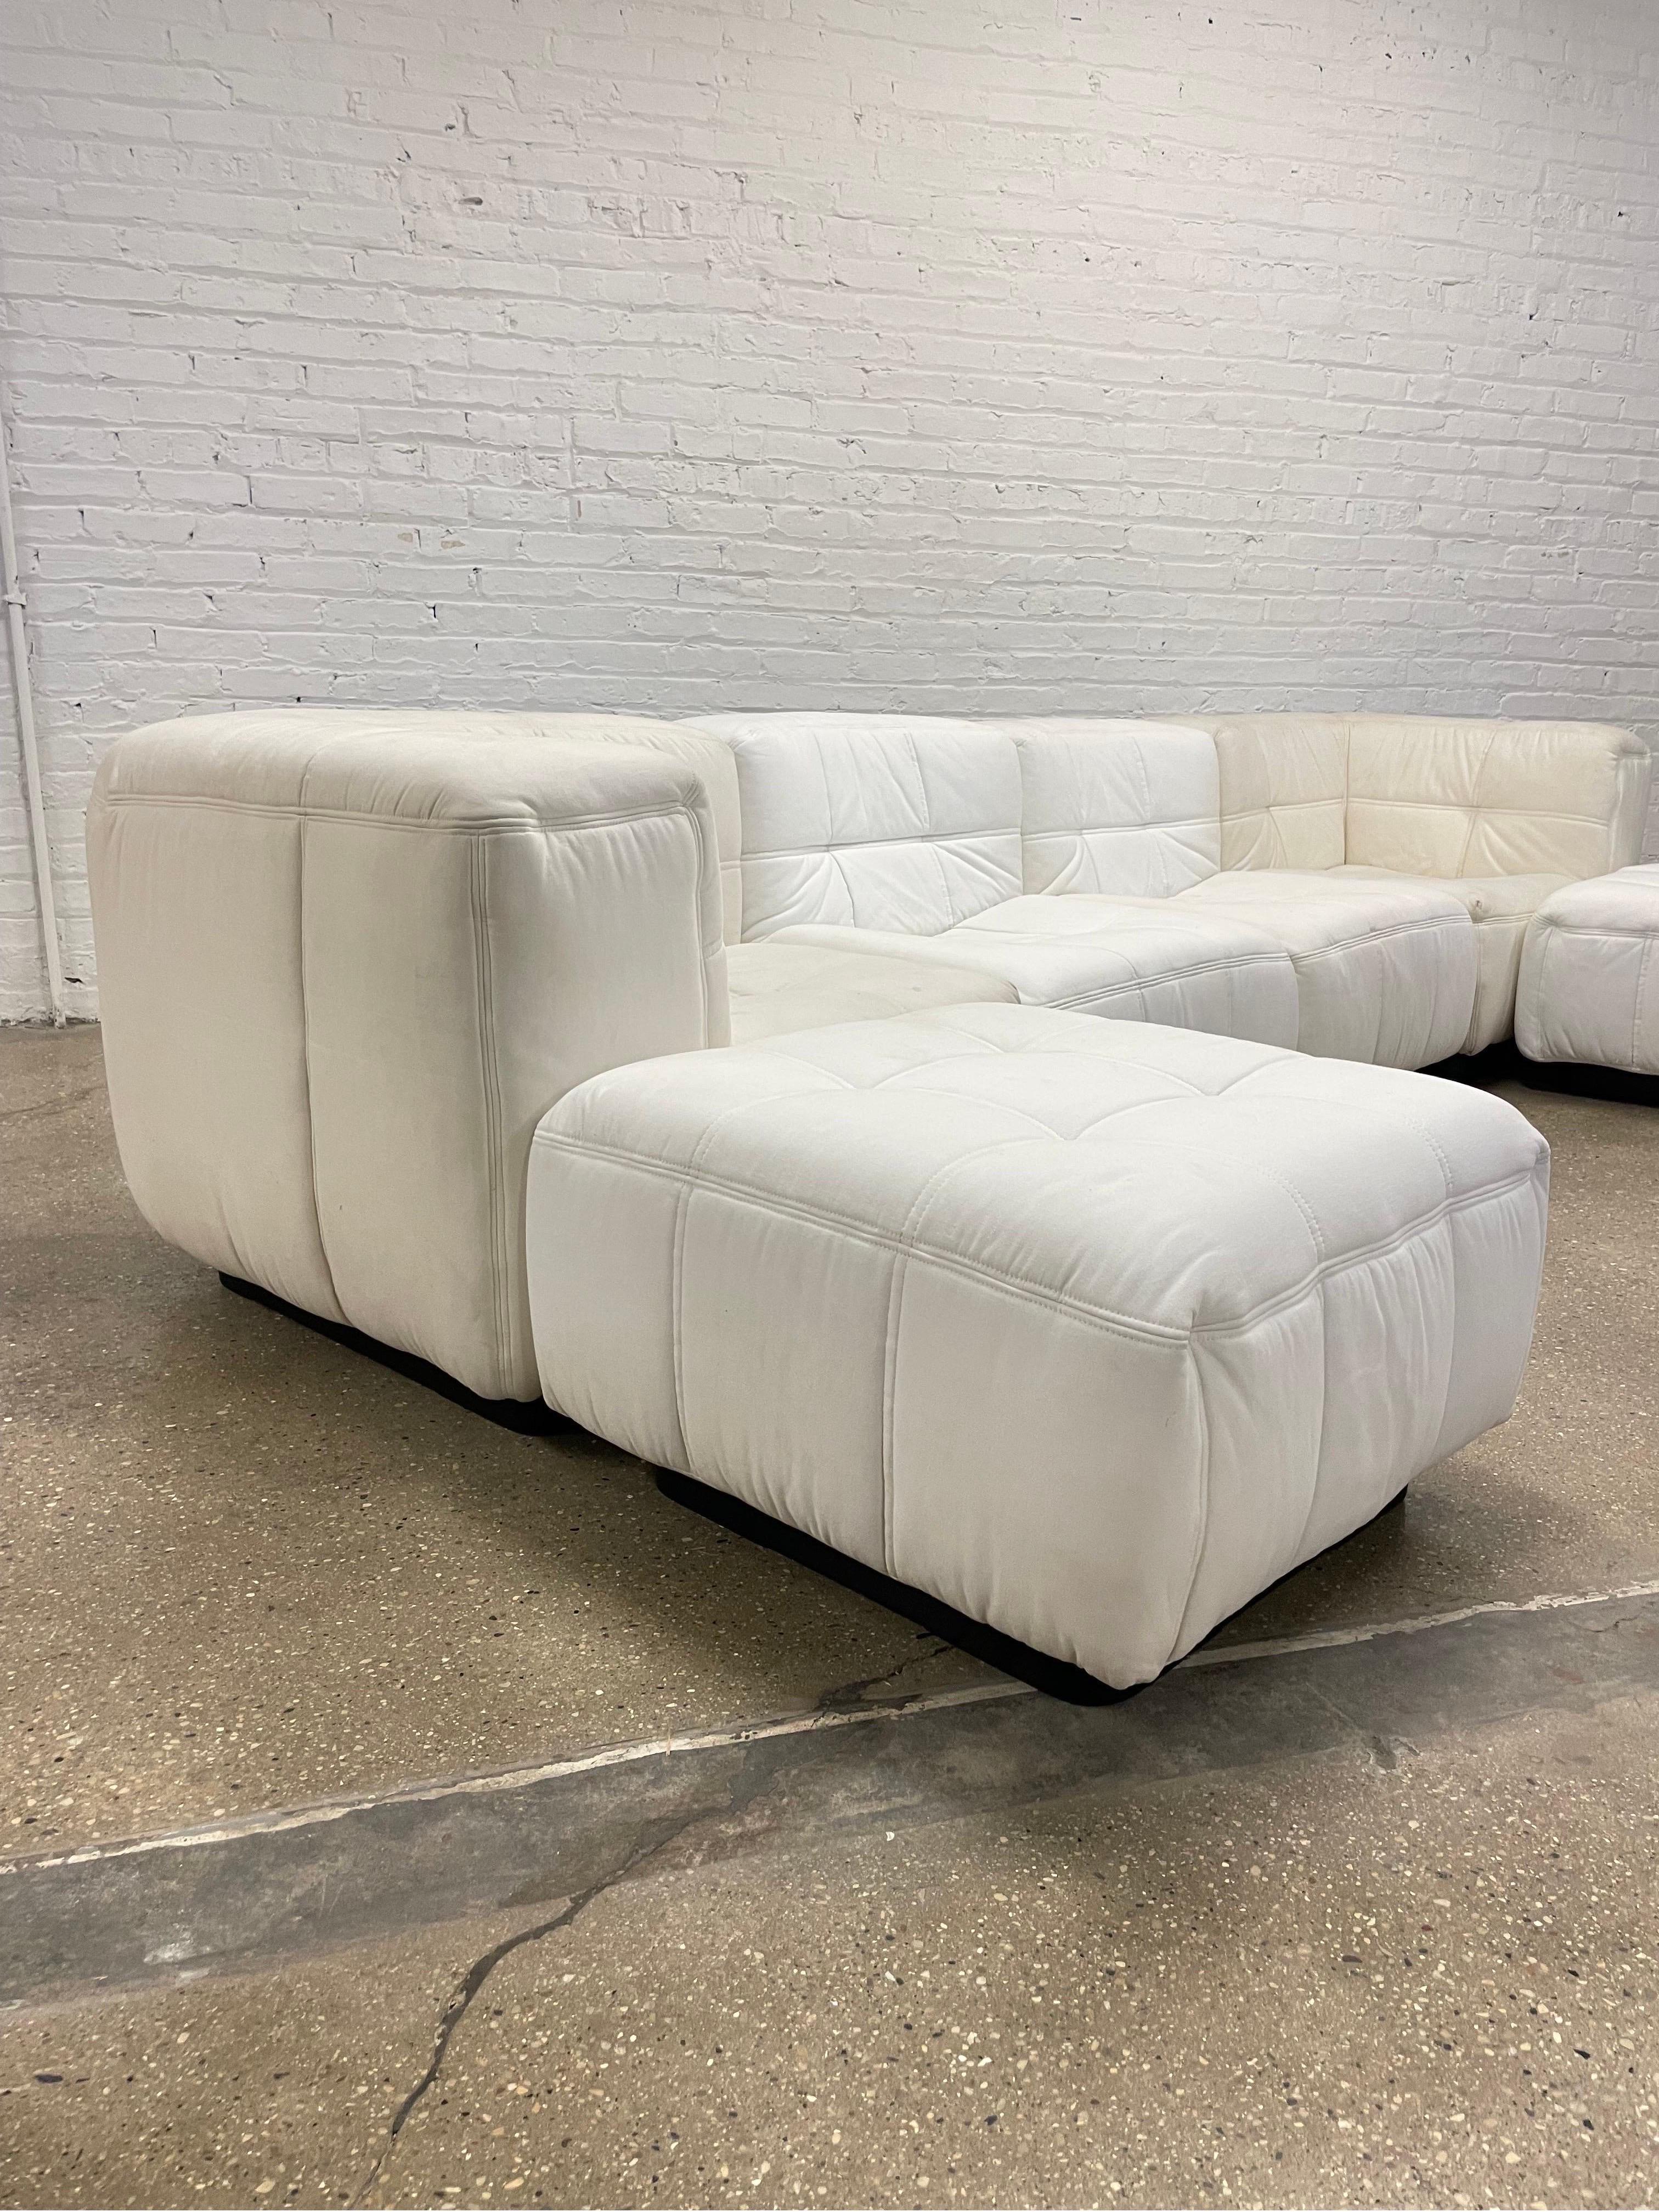 Cotton Kimba Sofa Designed by Michel Ducaroy for Ligne Roset, by Airborne / Arconas